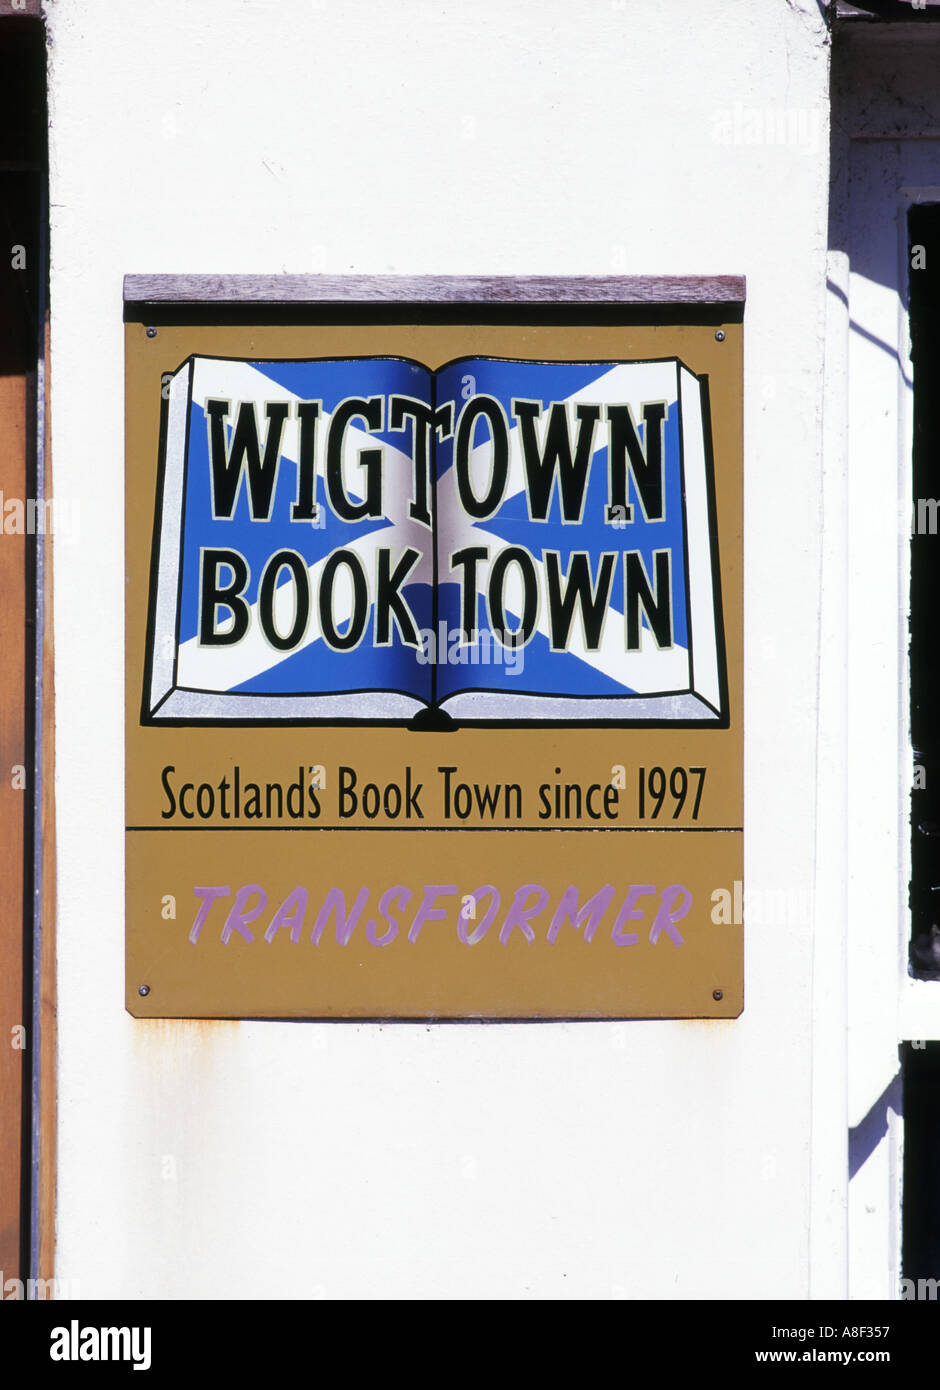 dh Scottish Books festival WIGTOWN DUMFRIES GALLOWAY Scotlands book town sign scotland Stock Photo